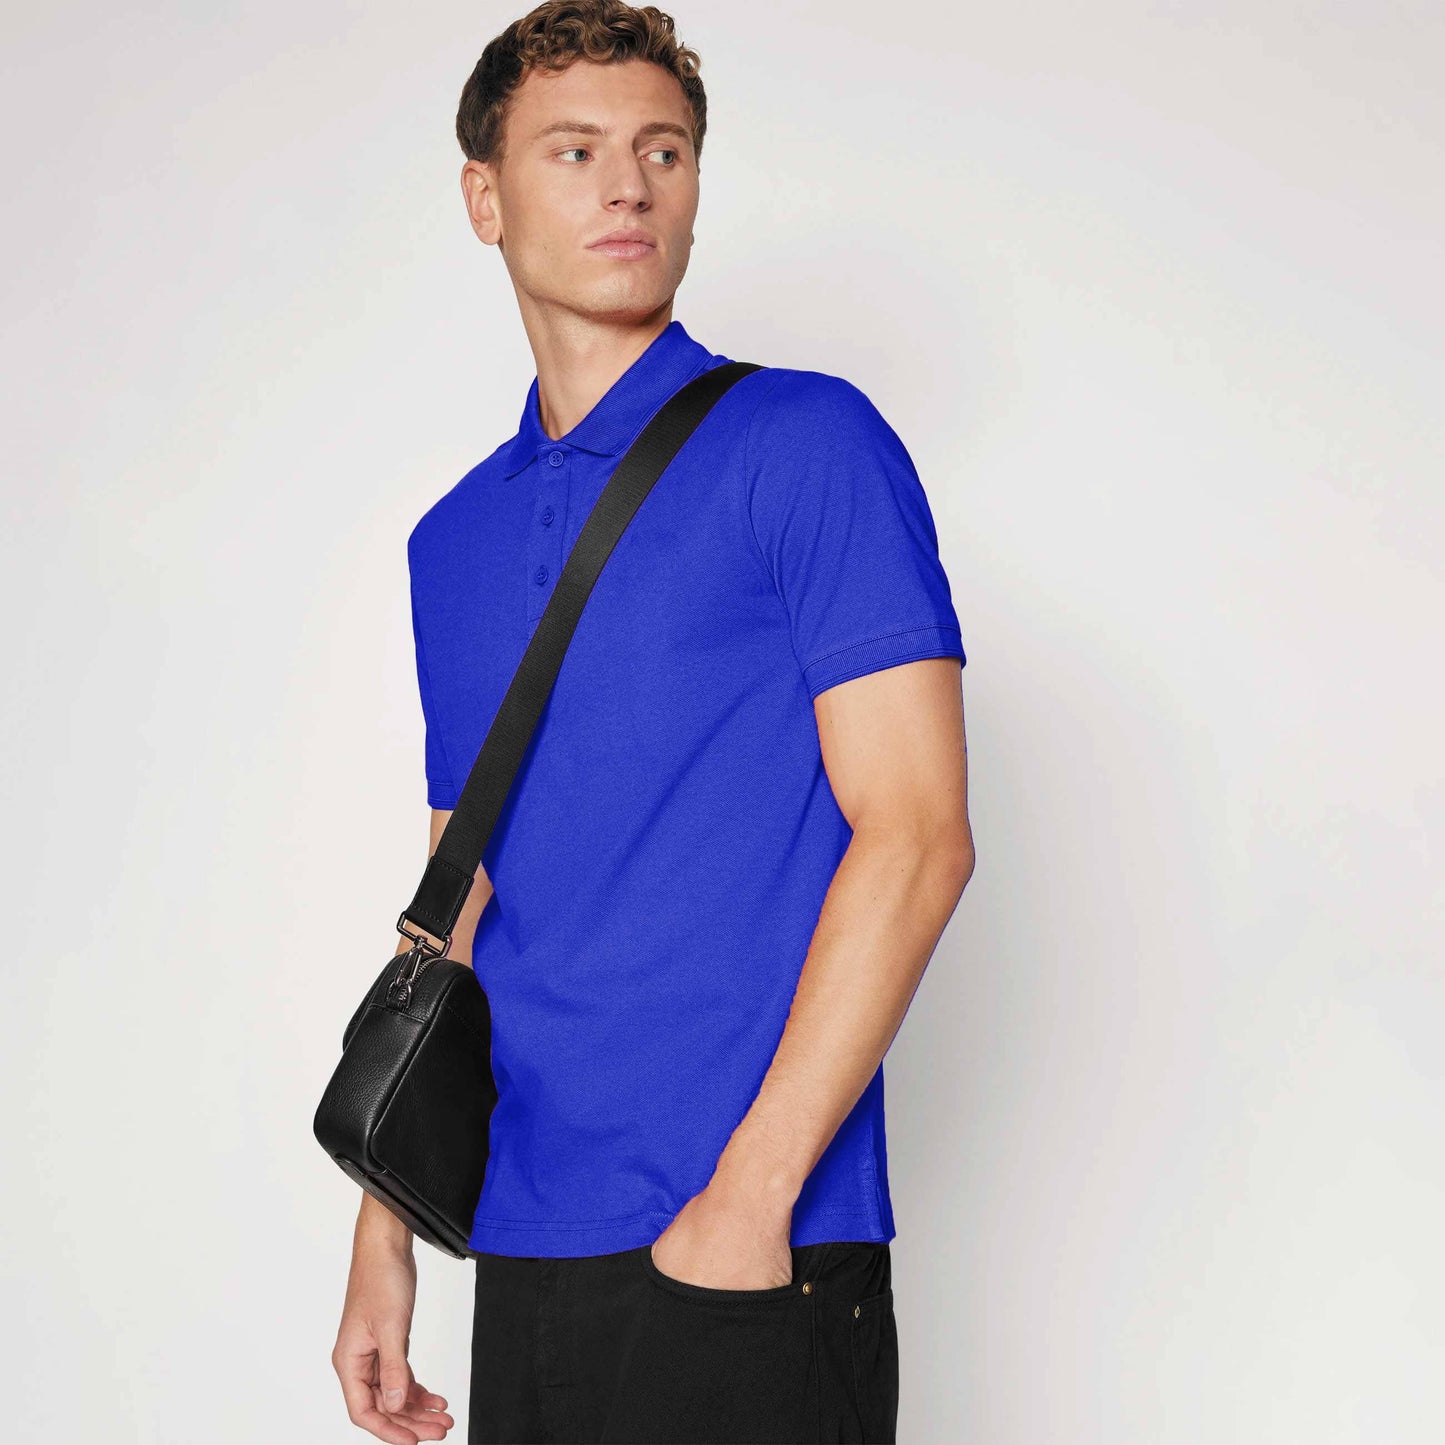 Platic Men's Short Sleeve with Minor Fault Polo Shirt Minor Fault Image Royal XS 